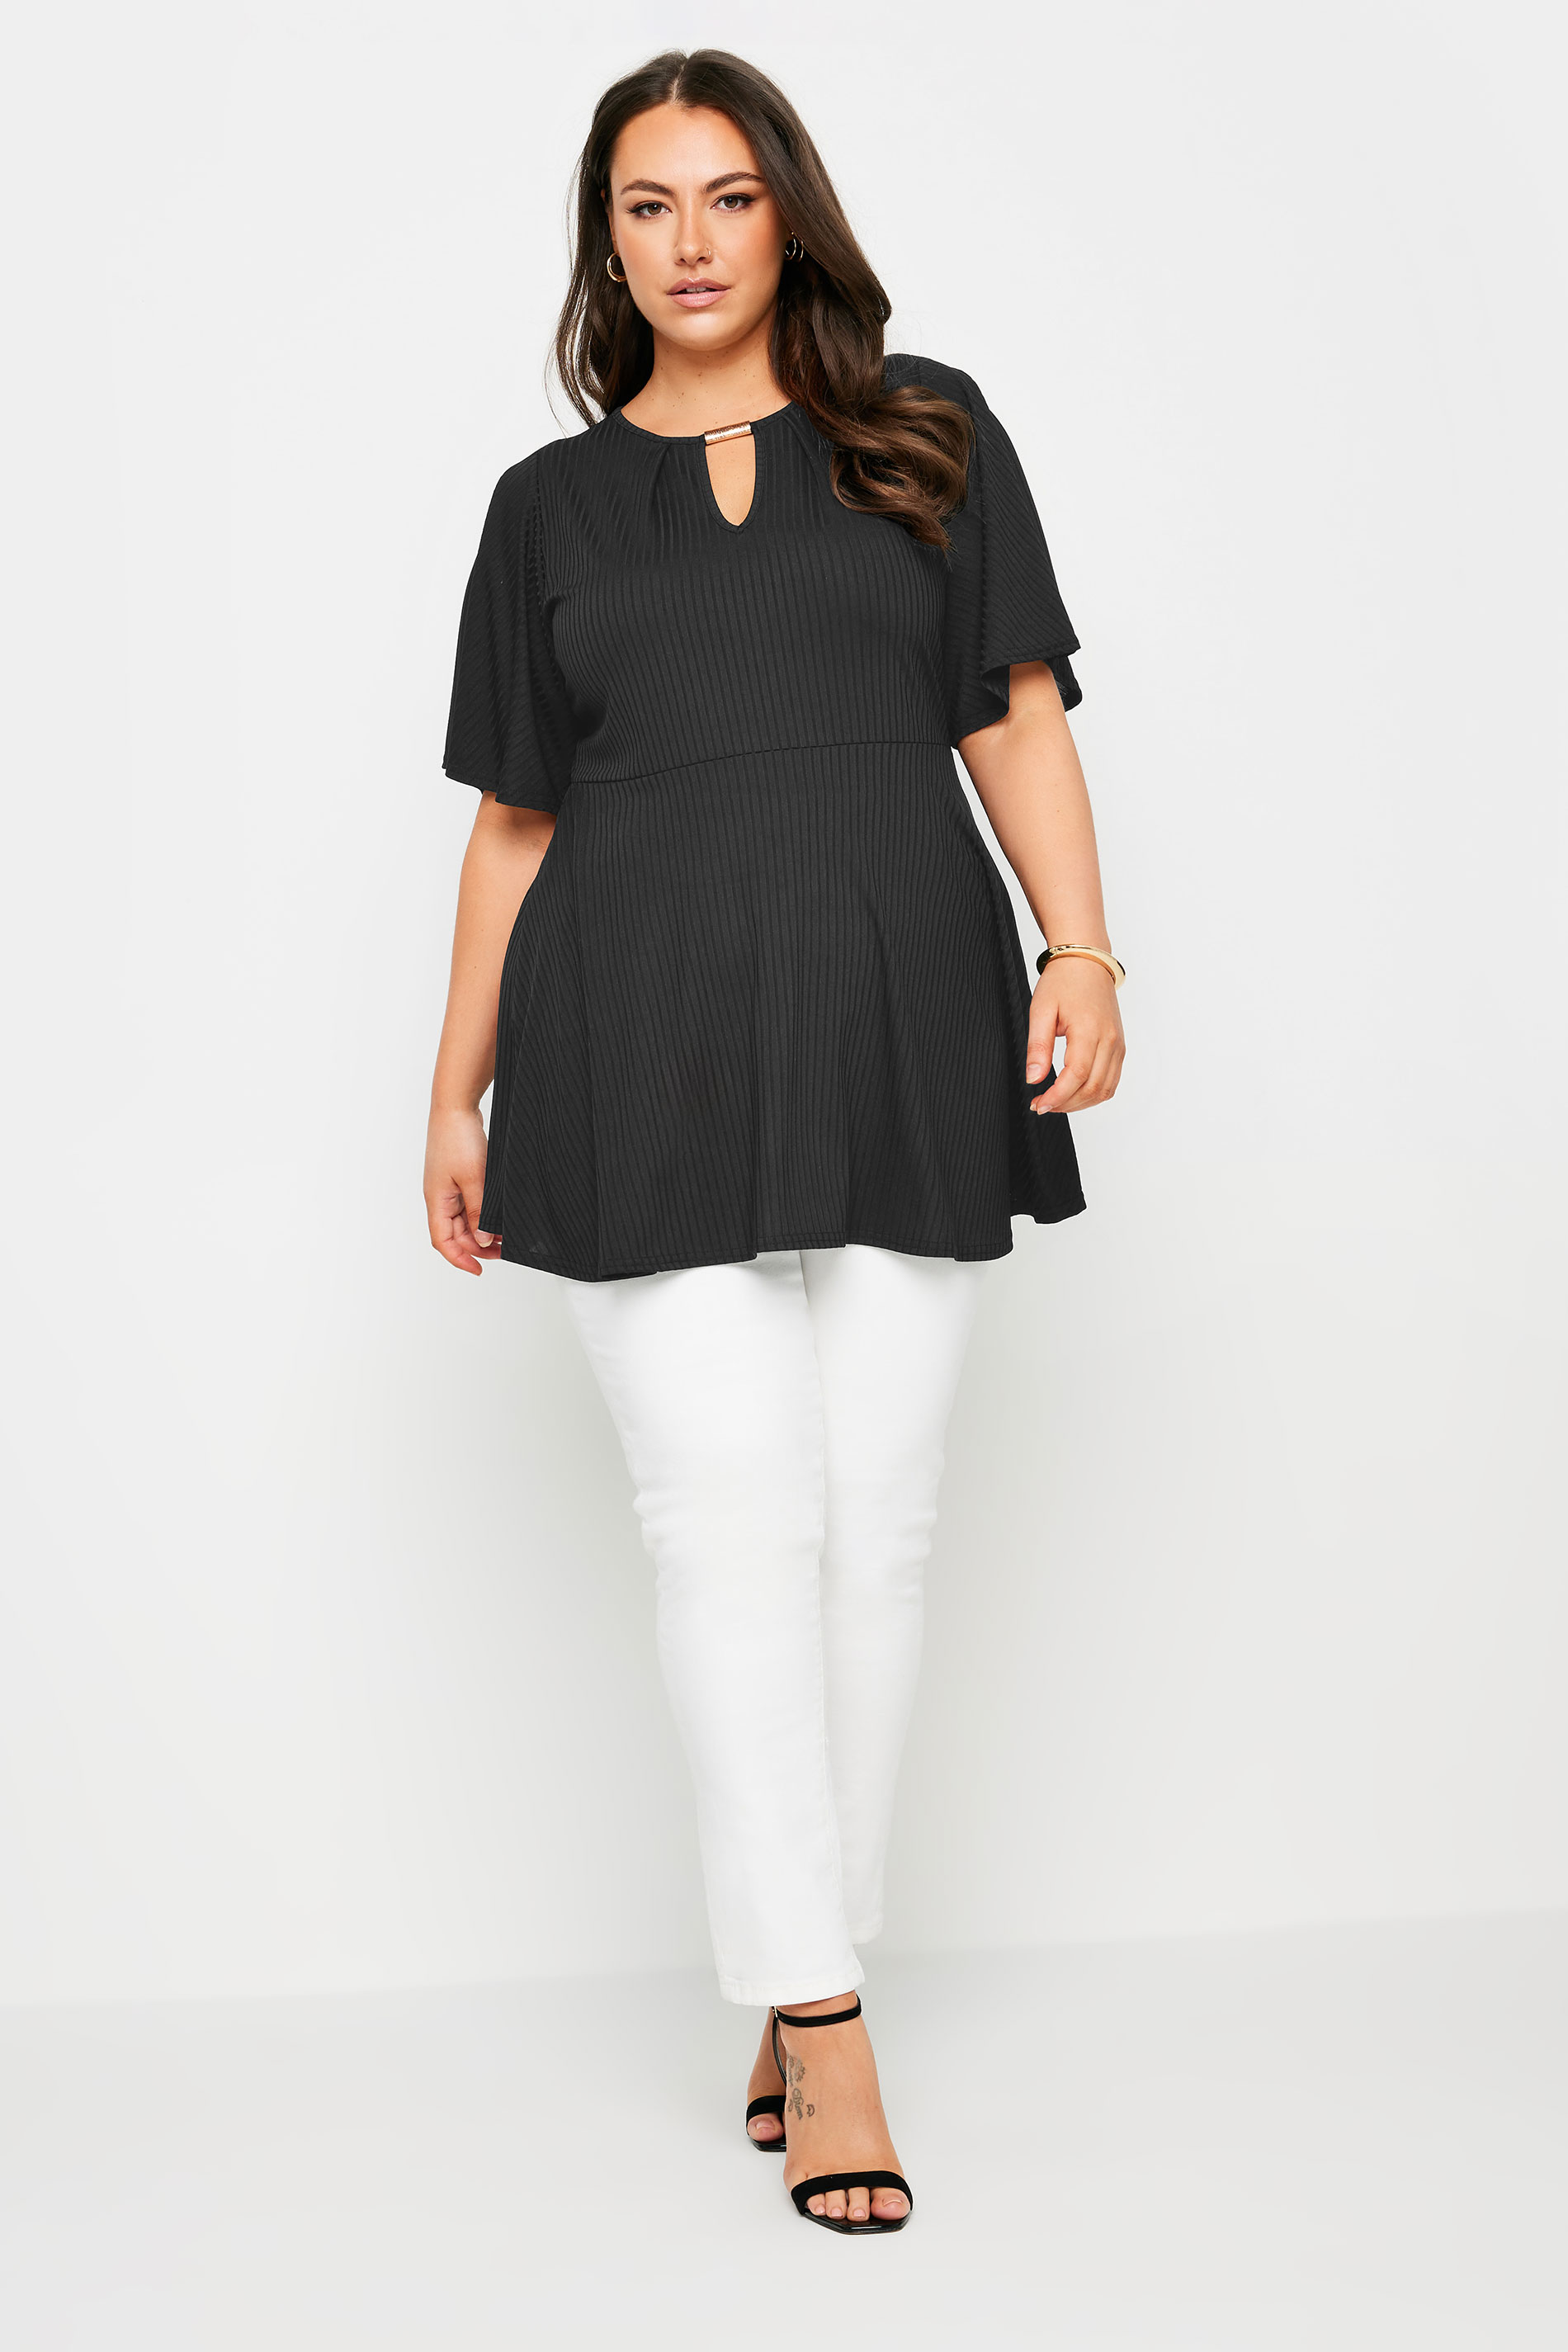 YOURS Plus Size Black Metal Trim Peplum Top | Yours Clothing 2